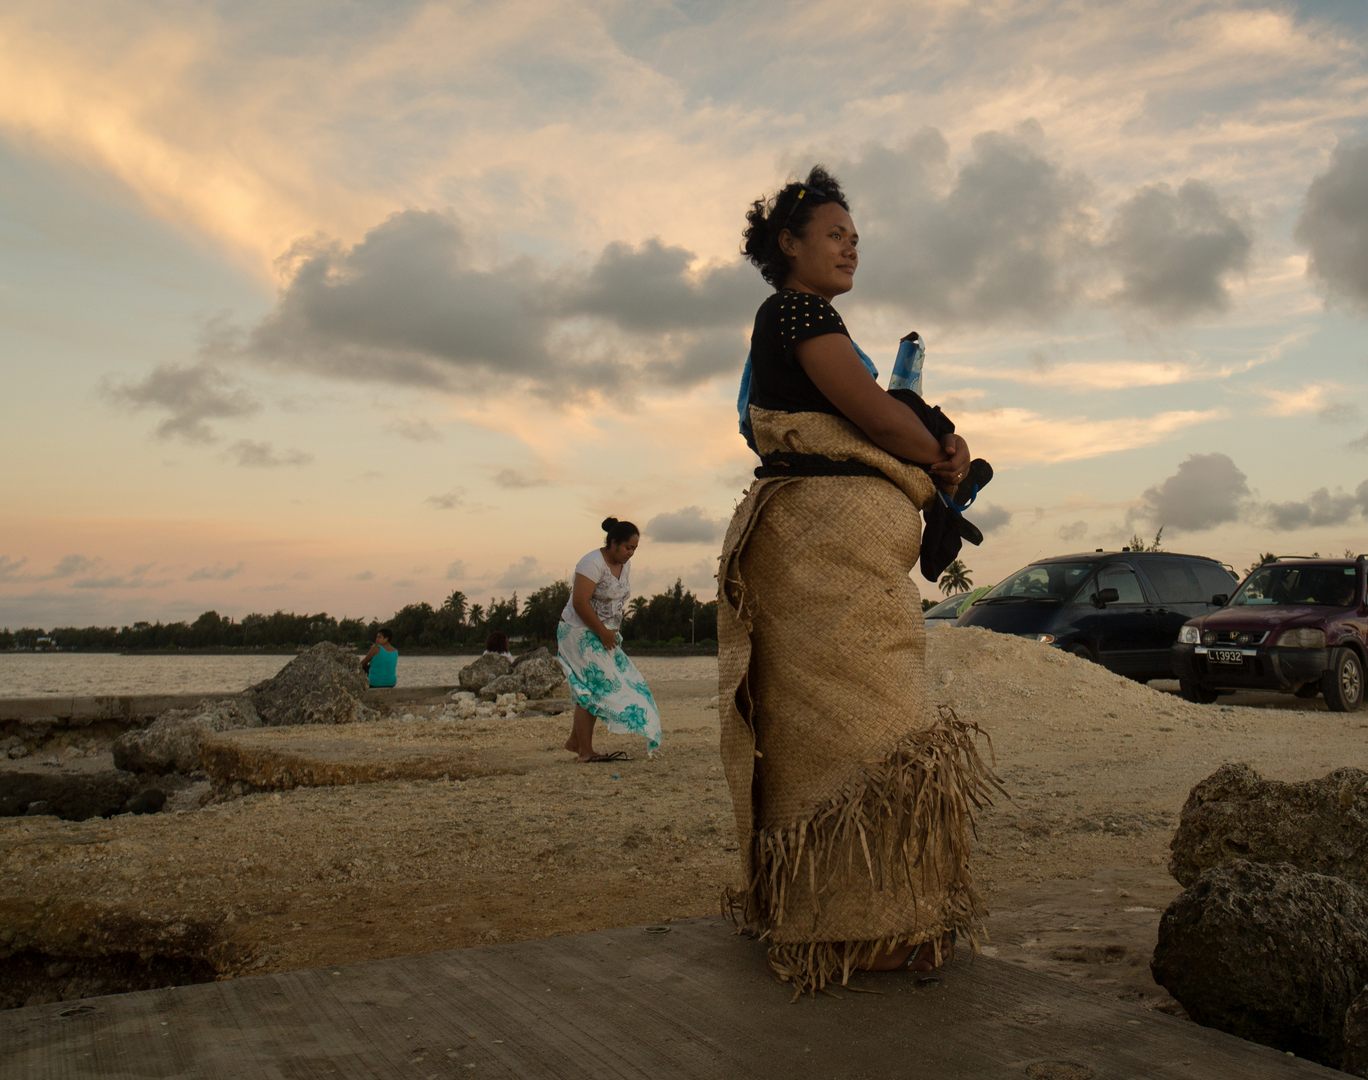 New laws on Violence Against Women and Family law needed in all Pacific countries